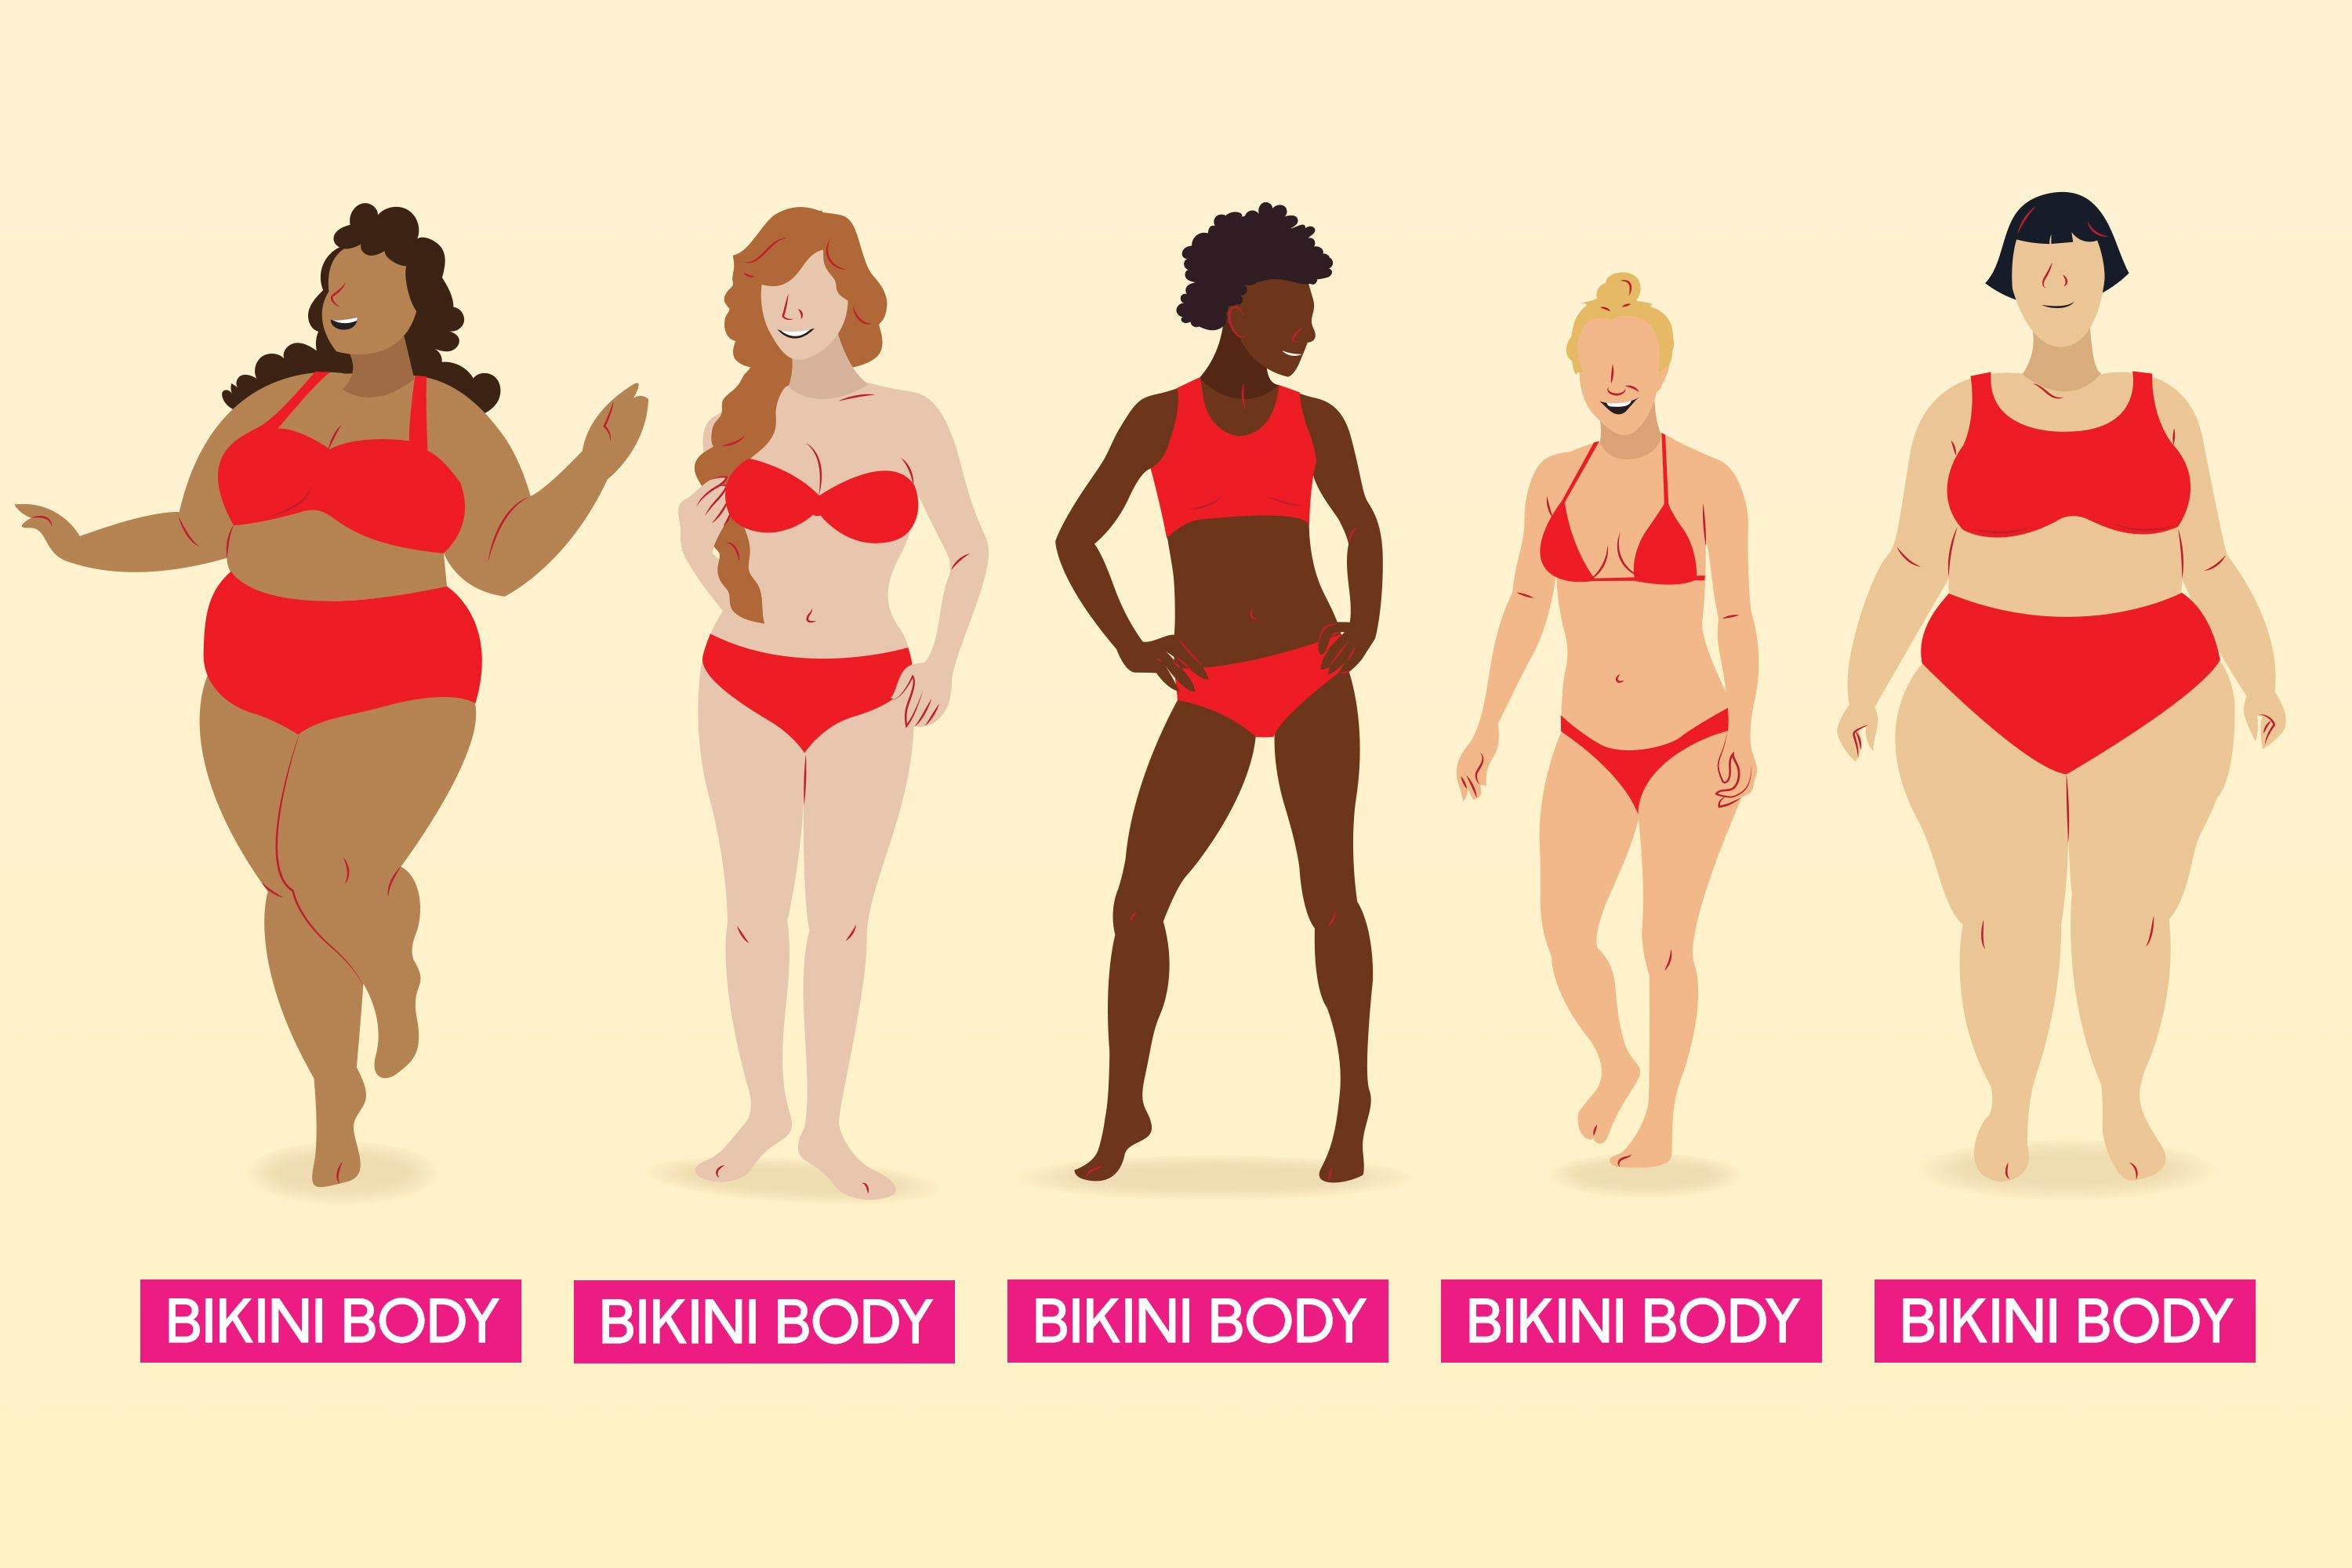 Bathing Suits For Body Types - Shop on Pinterest